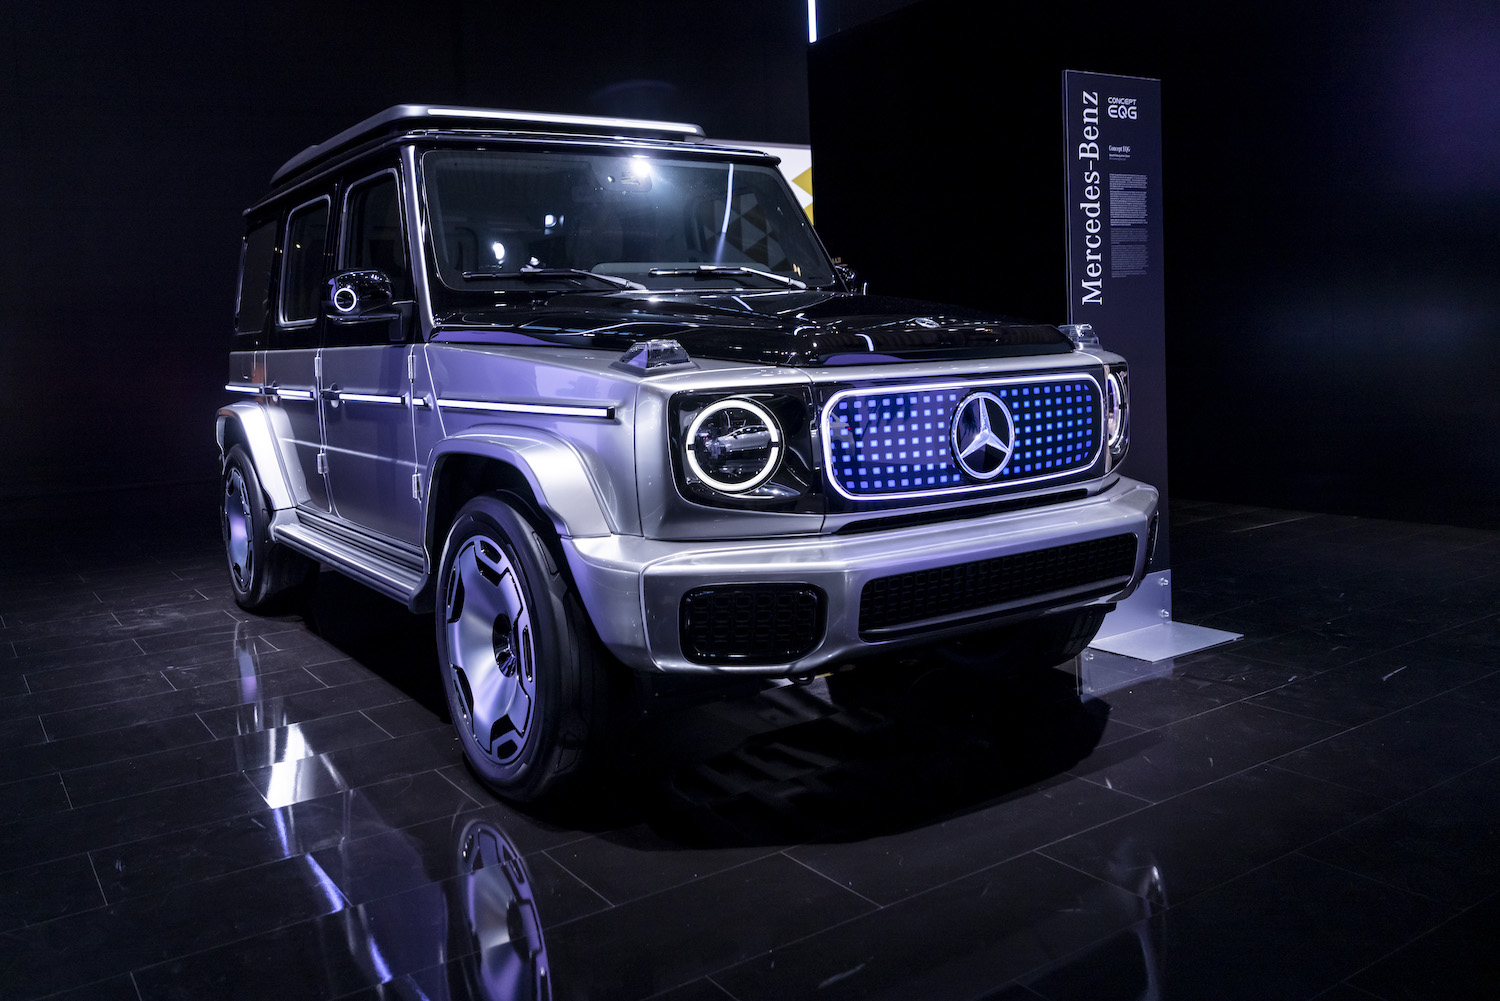 This is an electric EQG prototype at a 2021 auto show. The world will be amazed by the electric g wagon specs, from the new Mercedes-Benz EQG electric SUV